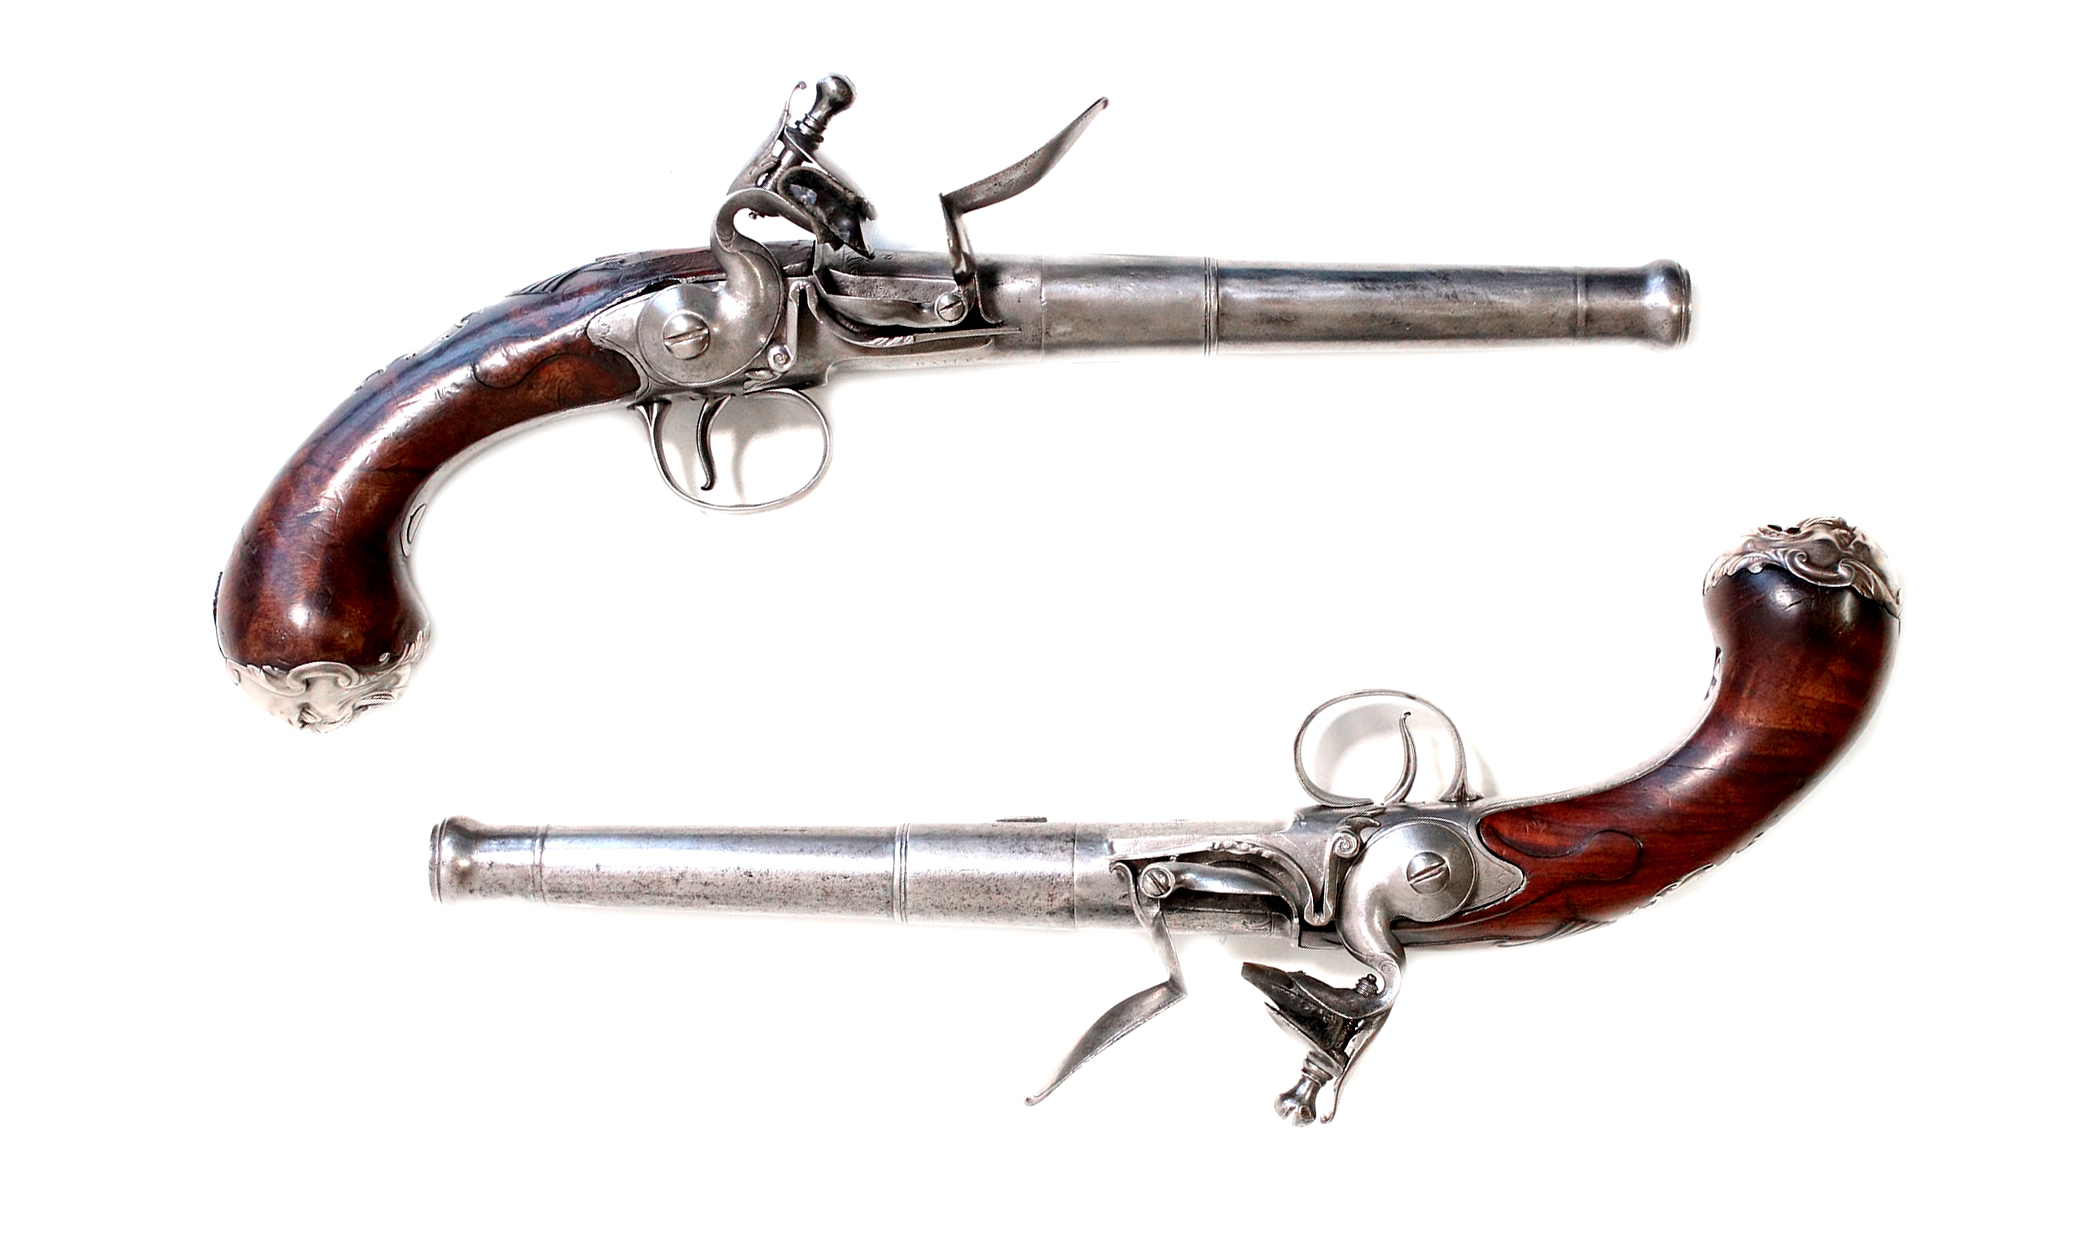 A Pair of 20 Bore Queen Anne Flintlock Pistols by William Bales